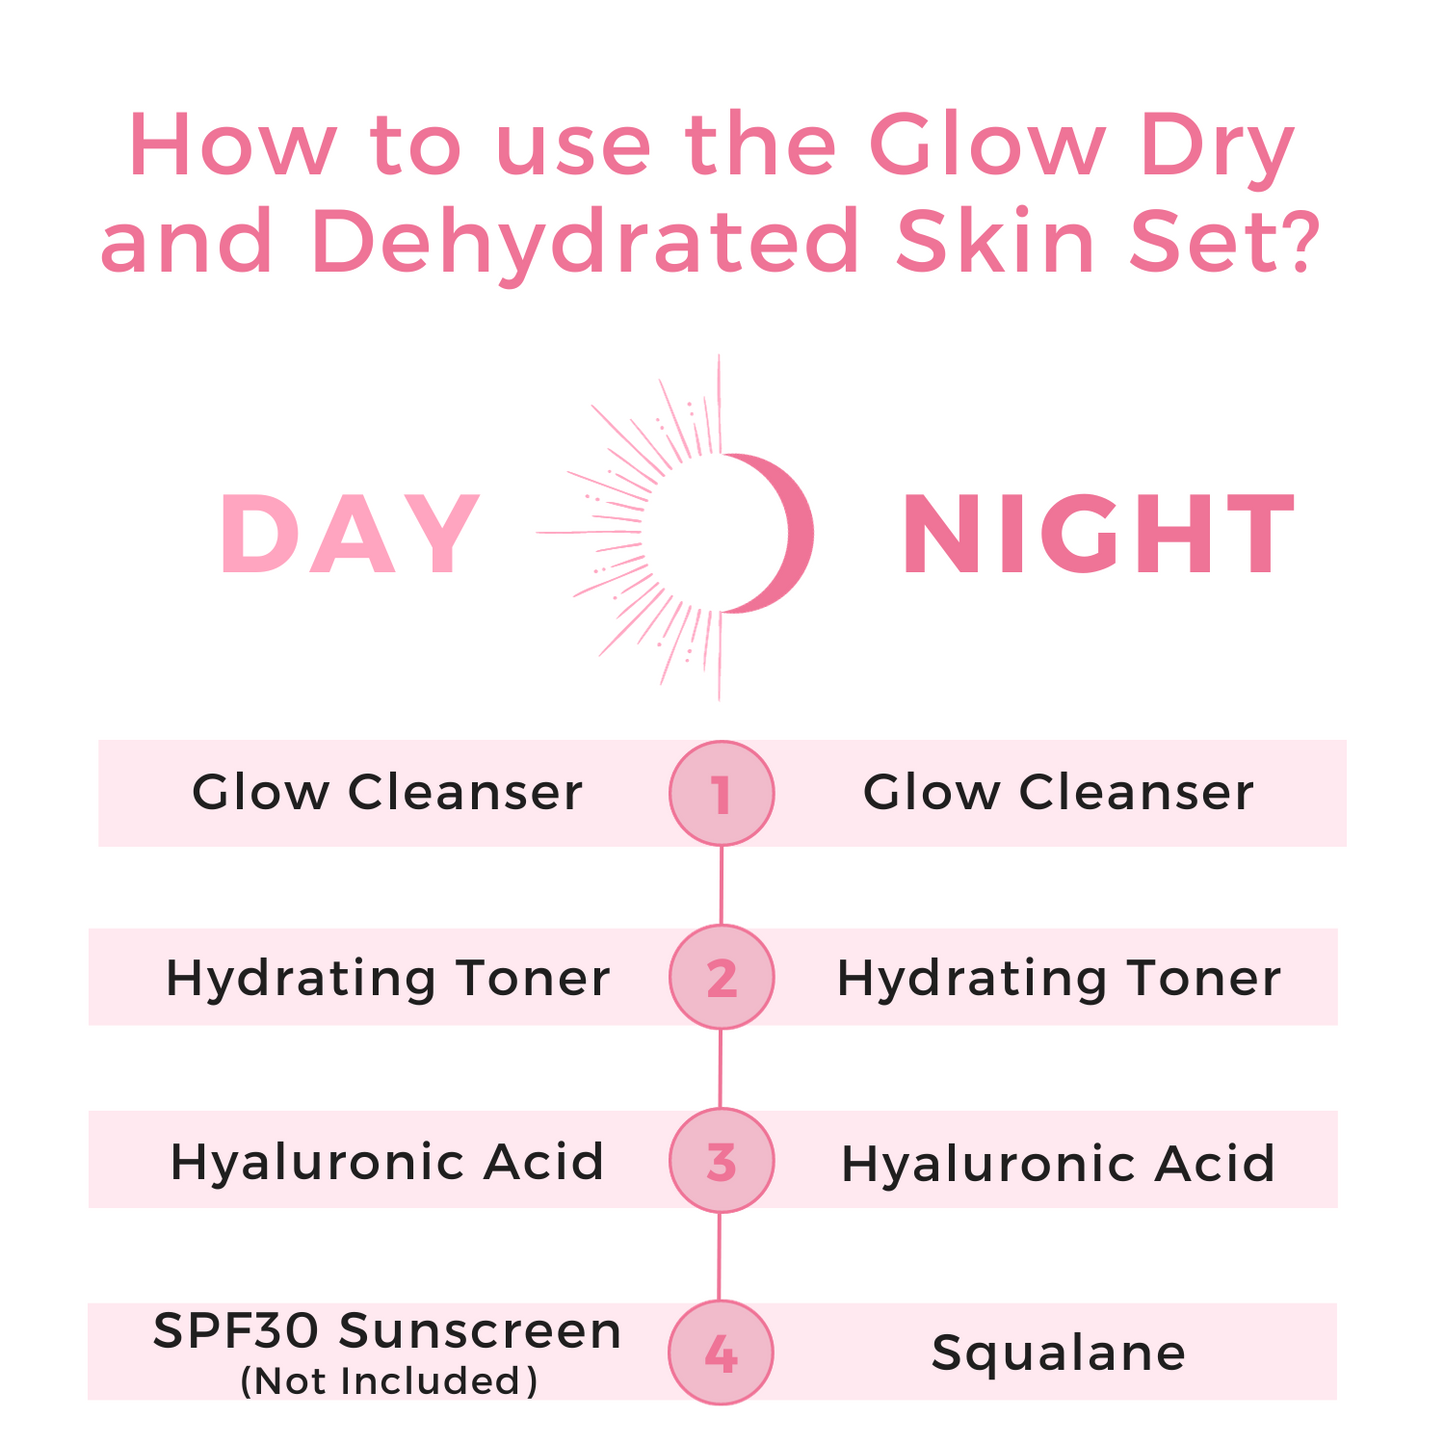 Glow | Dry and Dehydrated Skin 4 Set